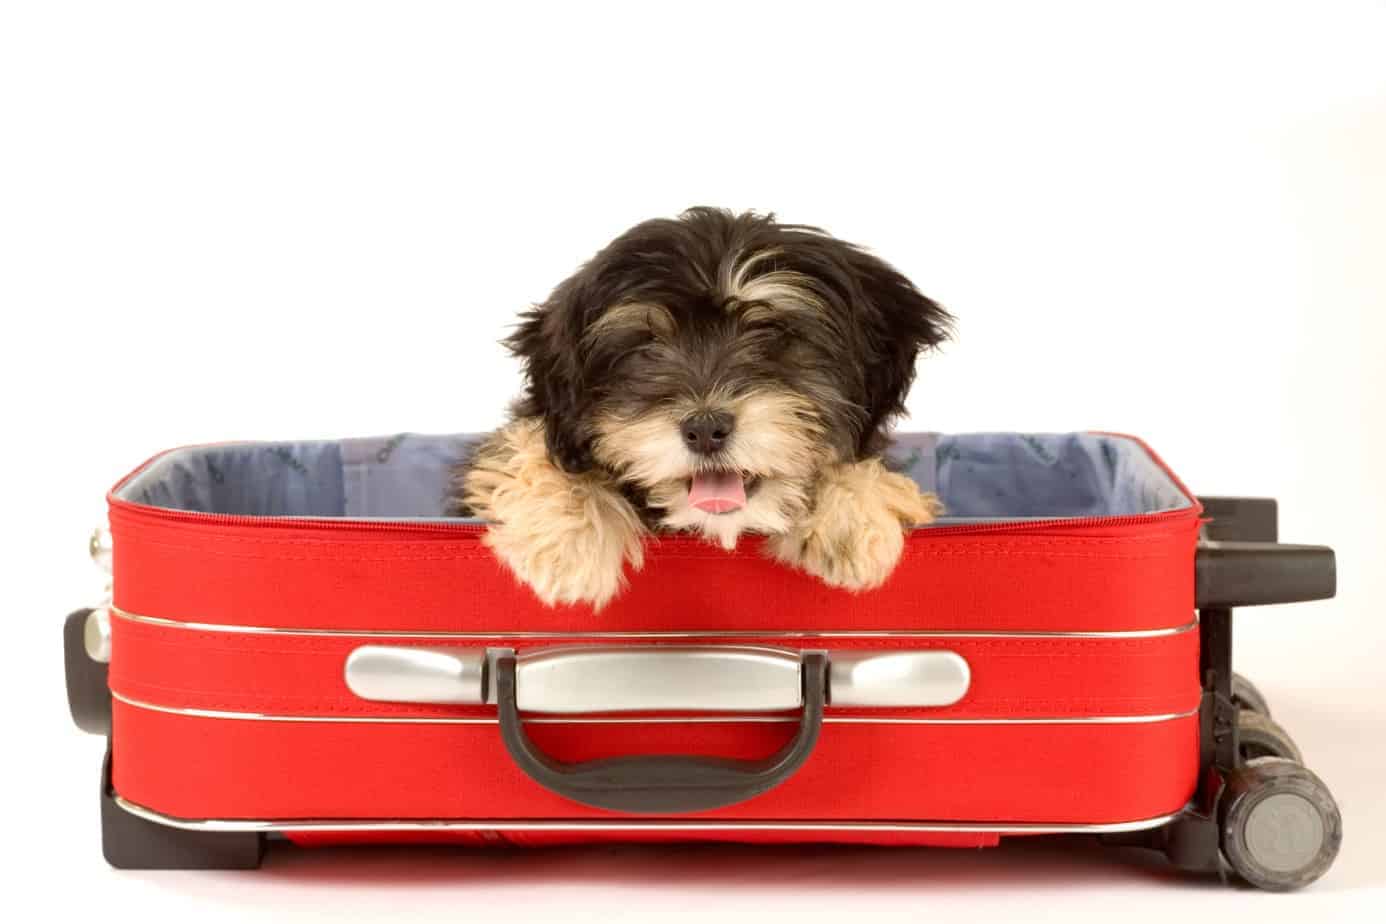 Where to keep your dog when you go on vacation Vacation Dog Care Make Arrangements To Keep Your Dog Safe